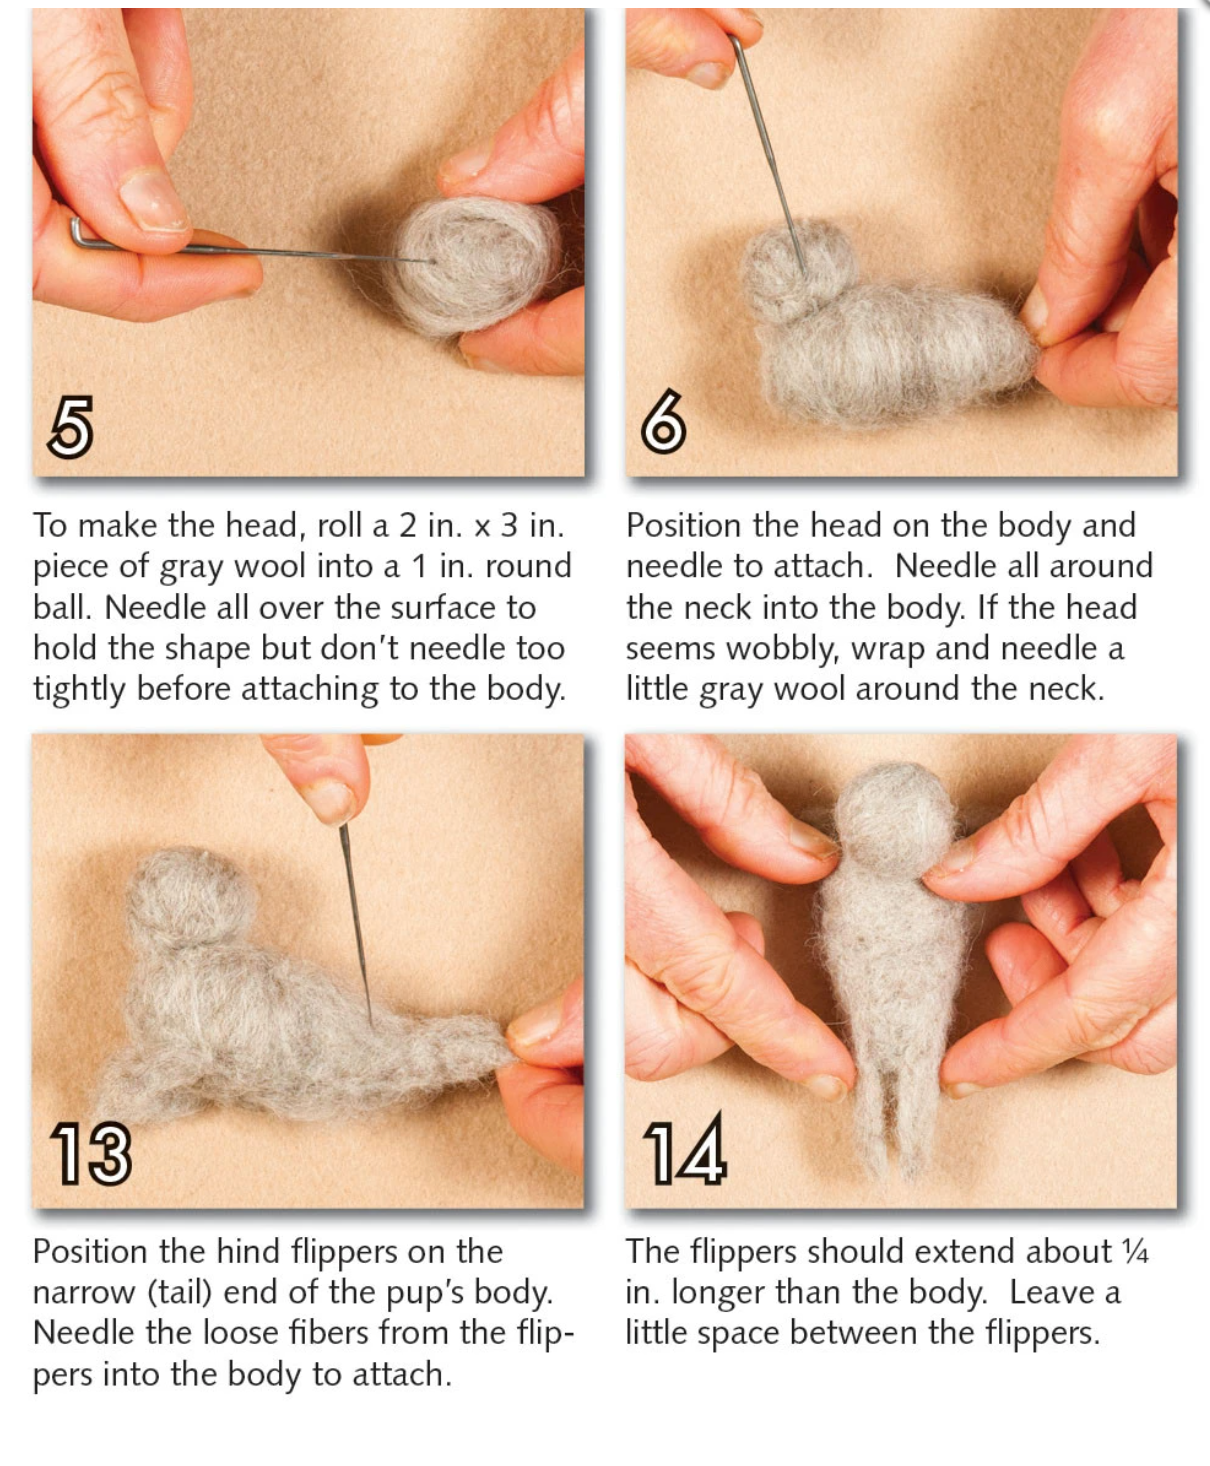 5 Little Monsters: Felted Wool Ball Jewelry